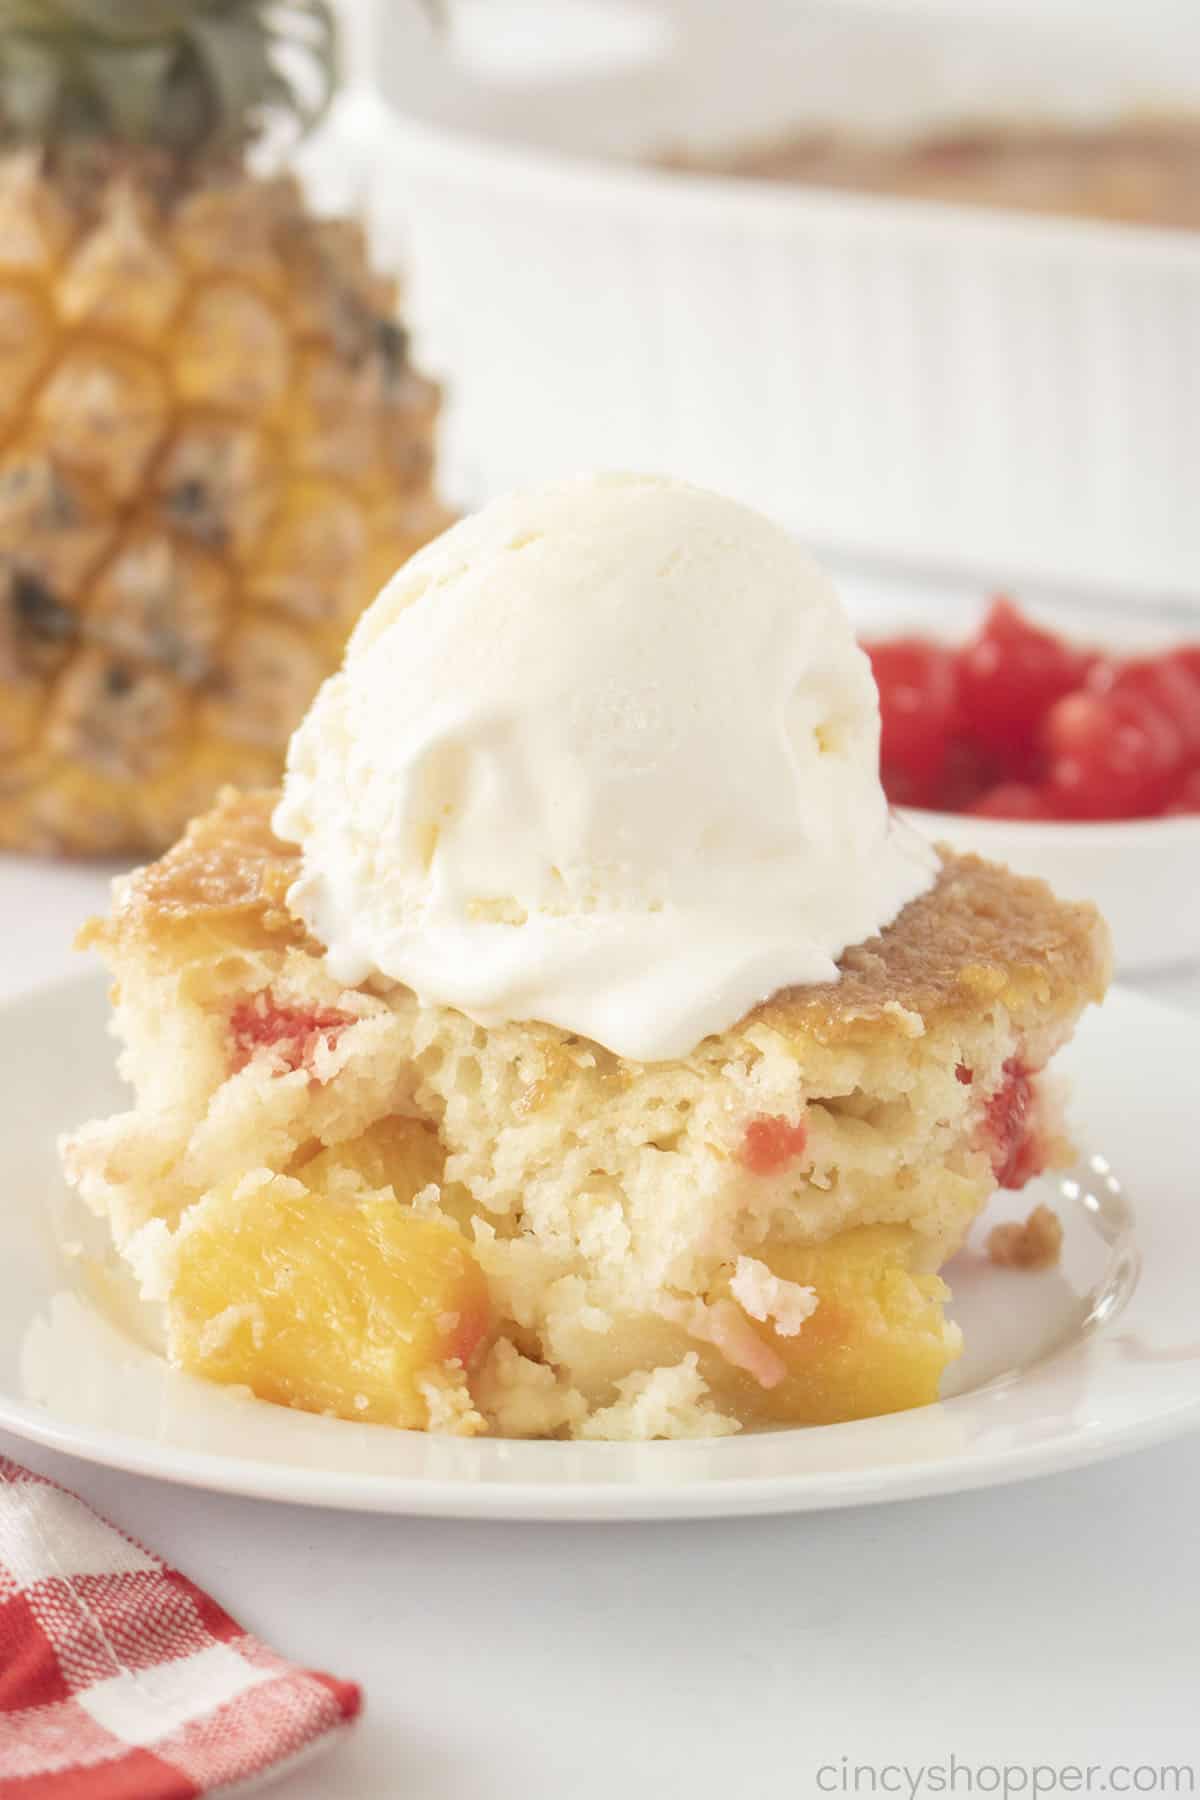 Piece of Pineapple Cobbler with ice cream on a white plate.